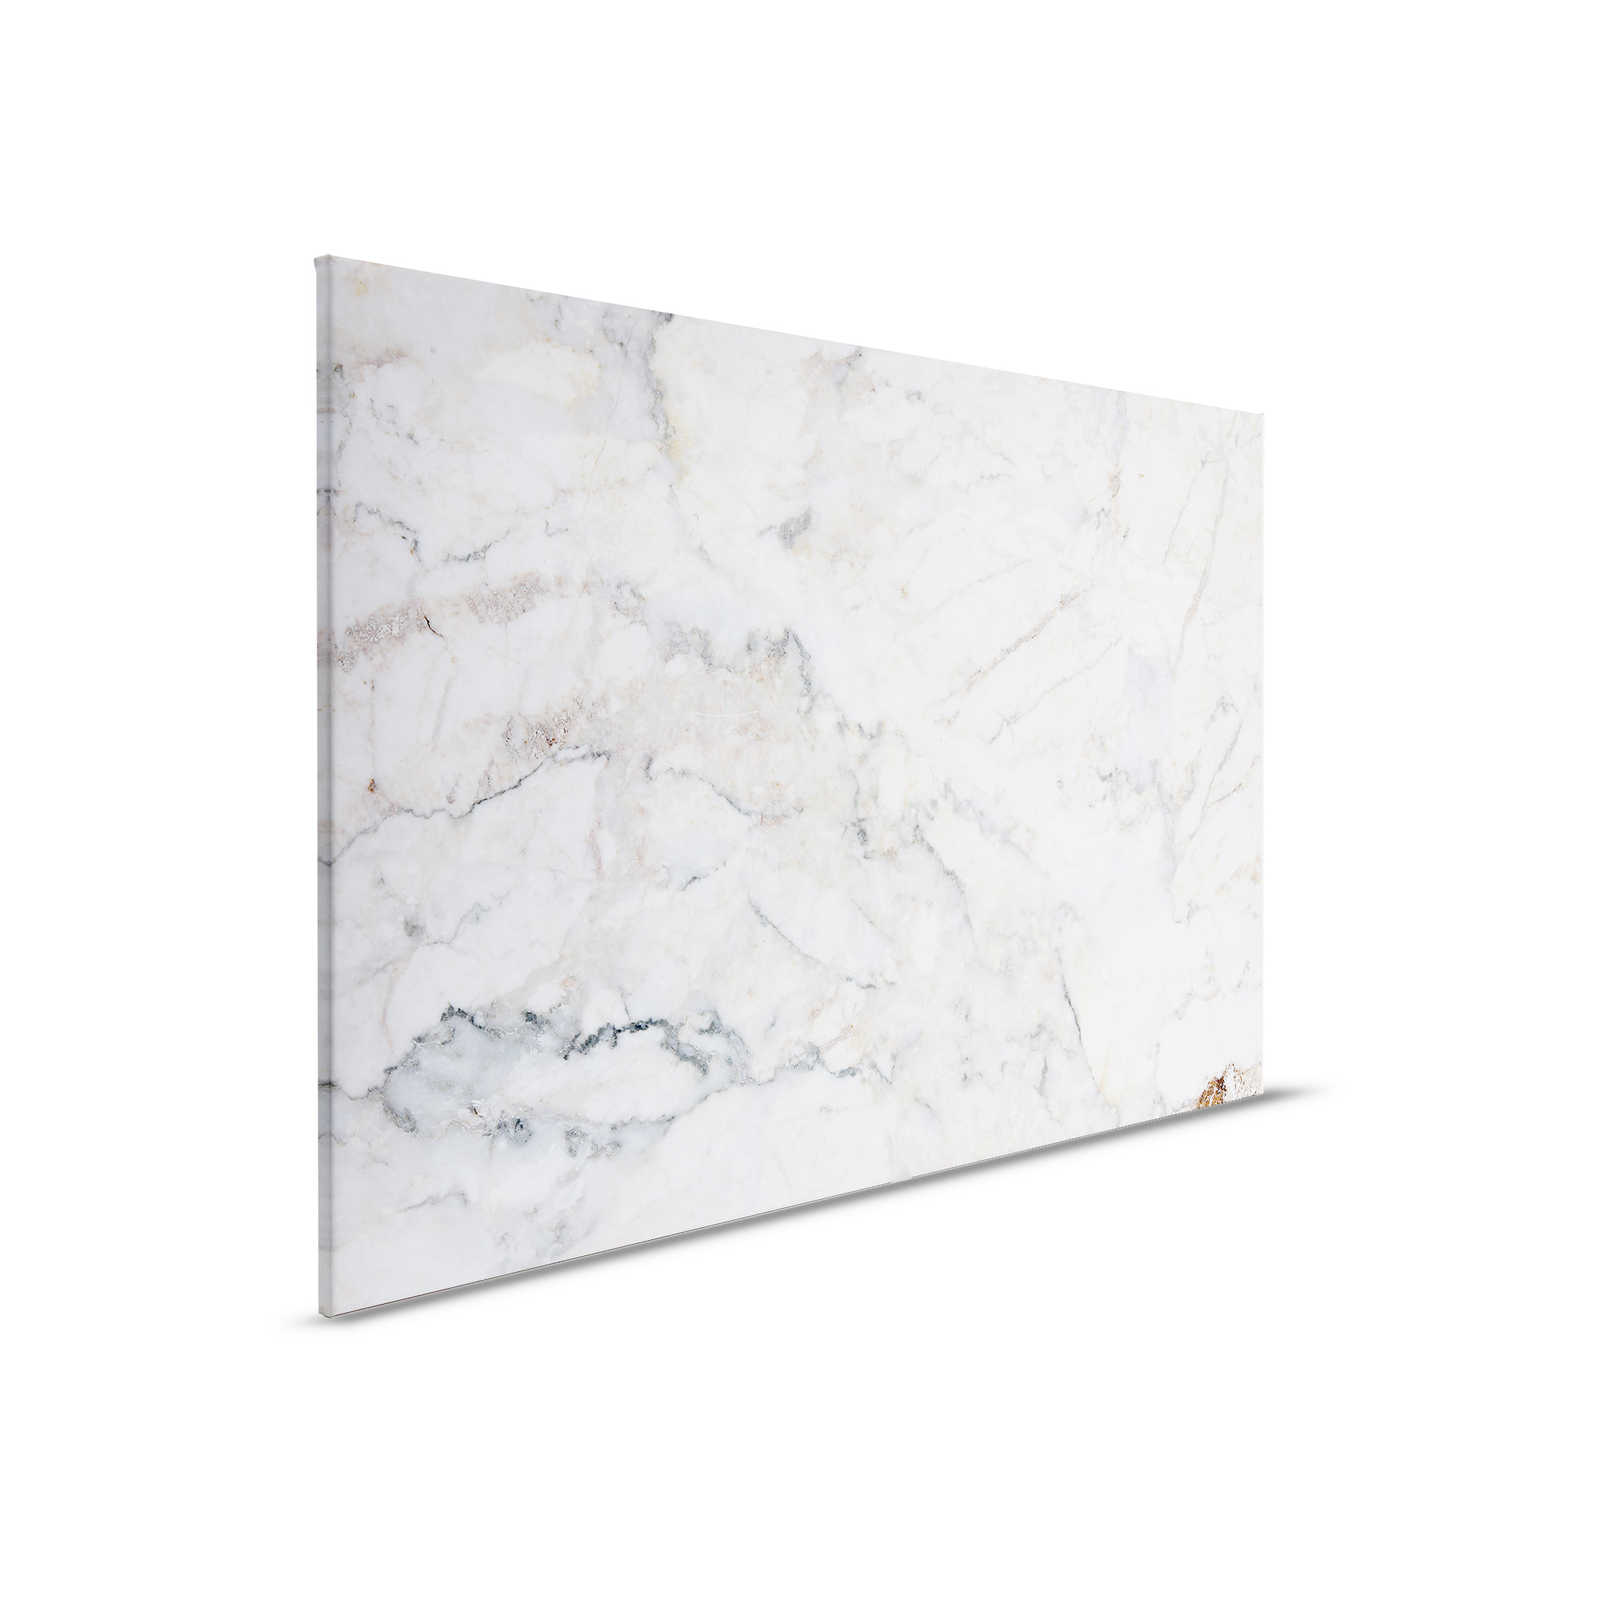         Canvas painting realistic & large marble - 0,90 m x 0,60 m
    